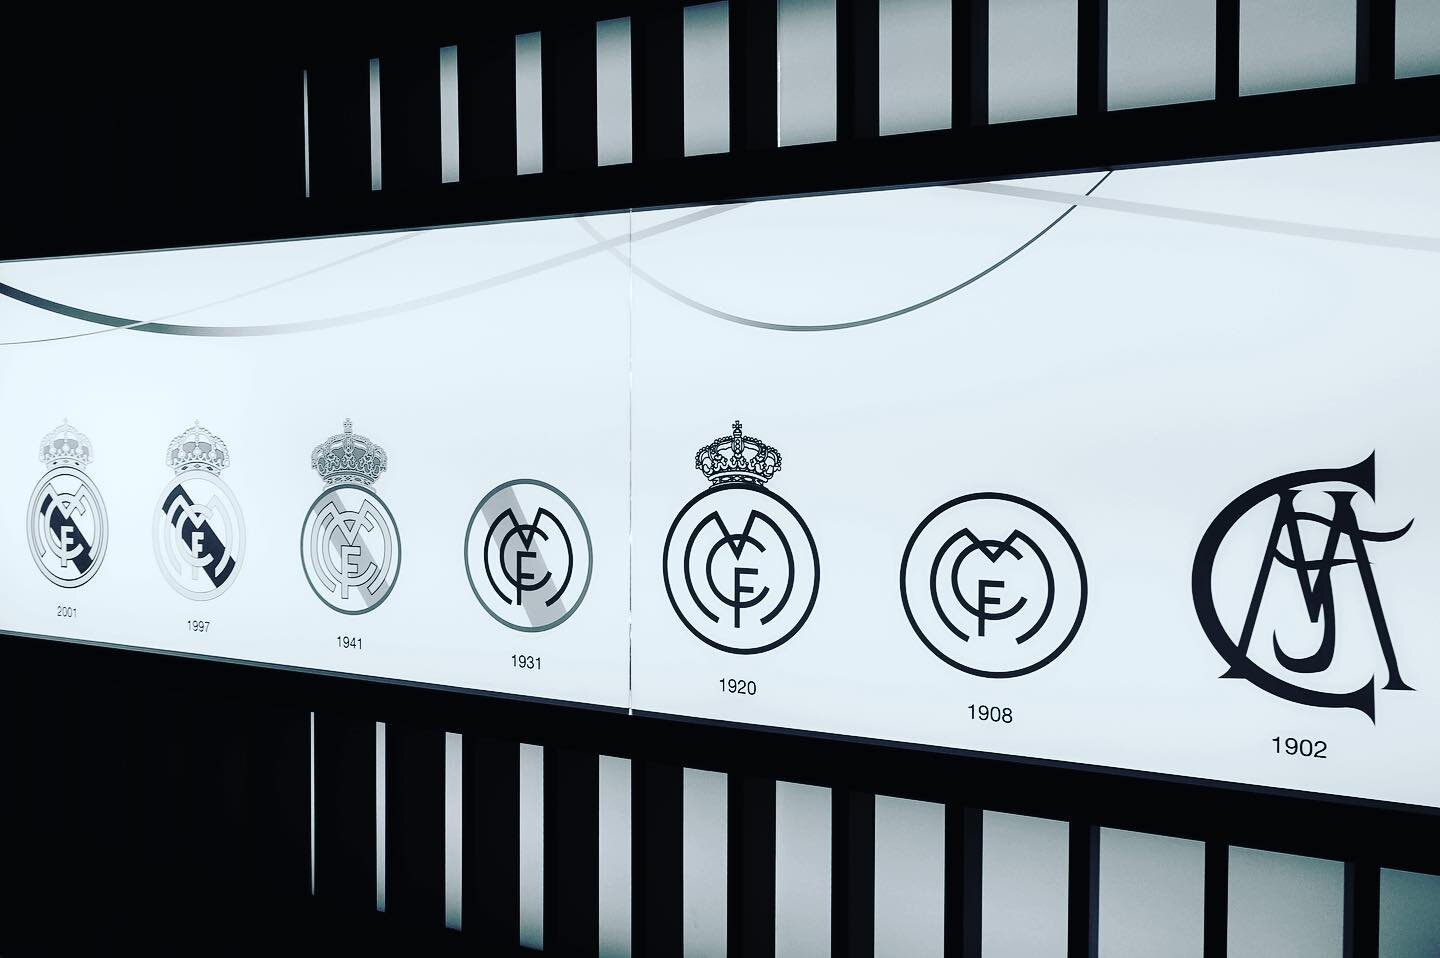 Real Madrid logo development from 1902 to present, 1920 is my personal favourite...not a bad trophy cabinet either.
&bull;
&bull;
&bull;
&bull;
&bull;
#realmadrid #bernabeu #logo #badge #design #development #ucl #championsleague #trophy 
#sony #sonyp